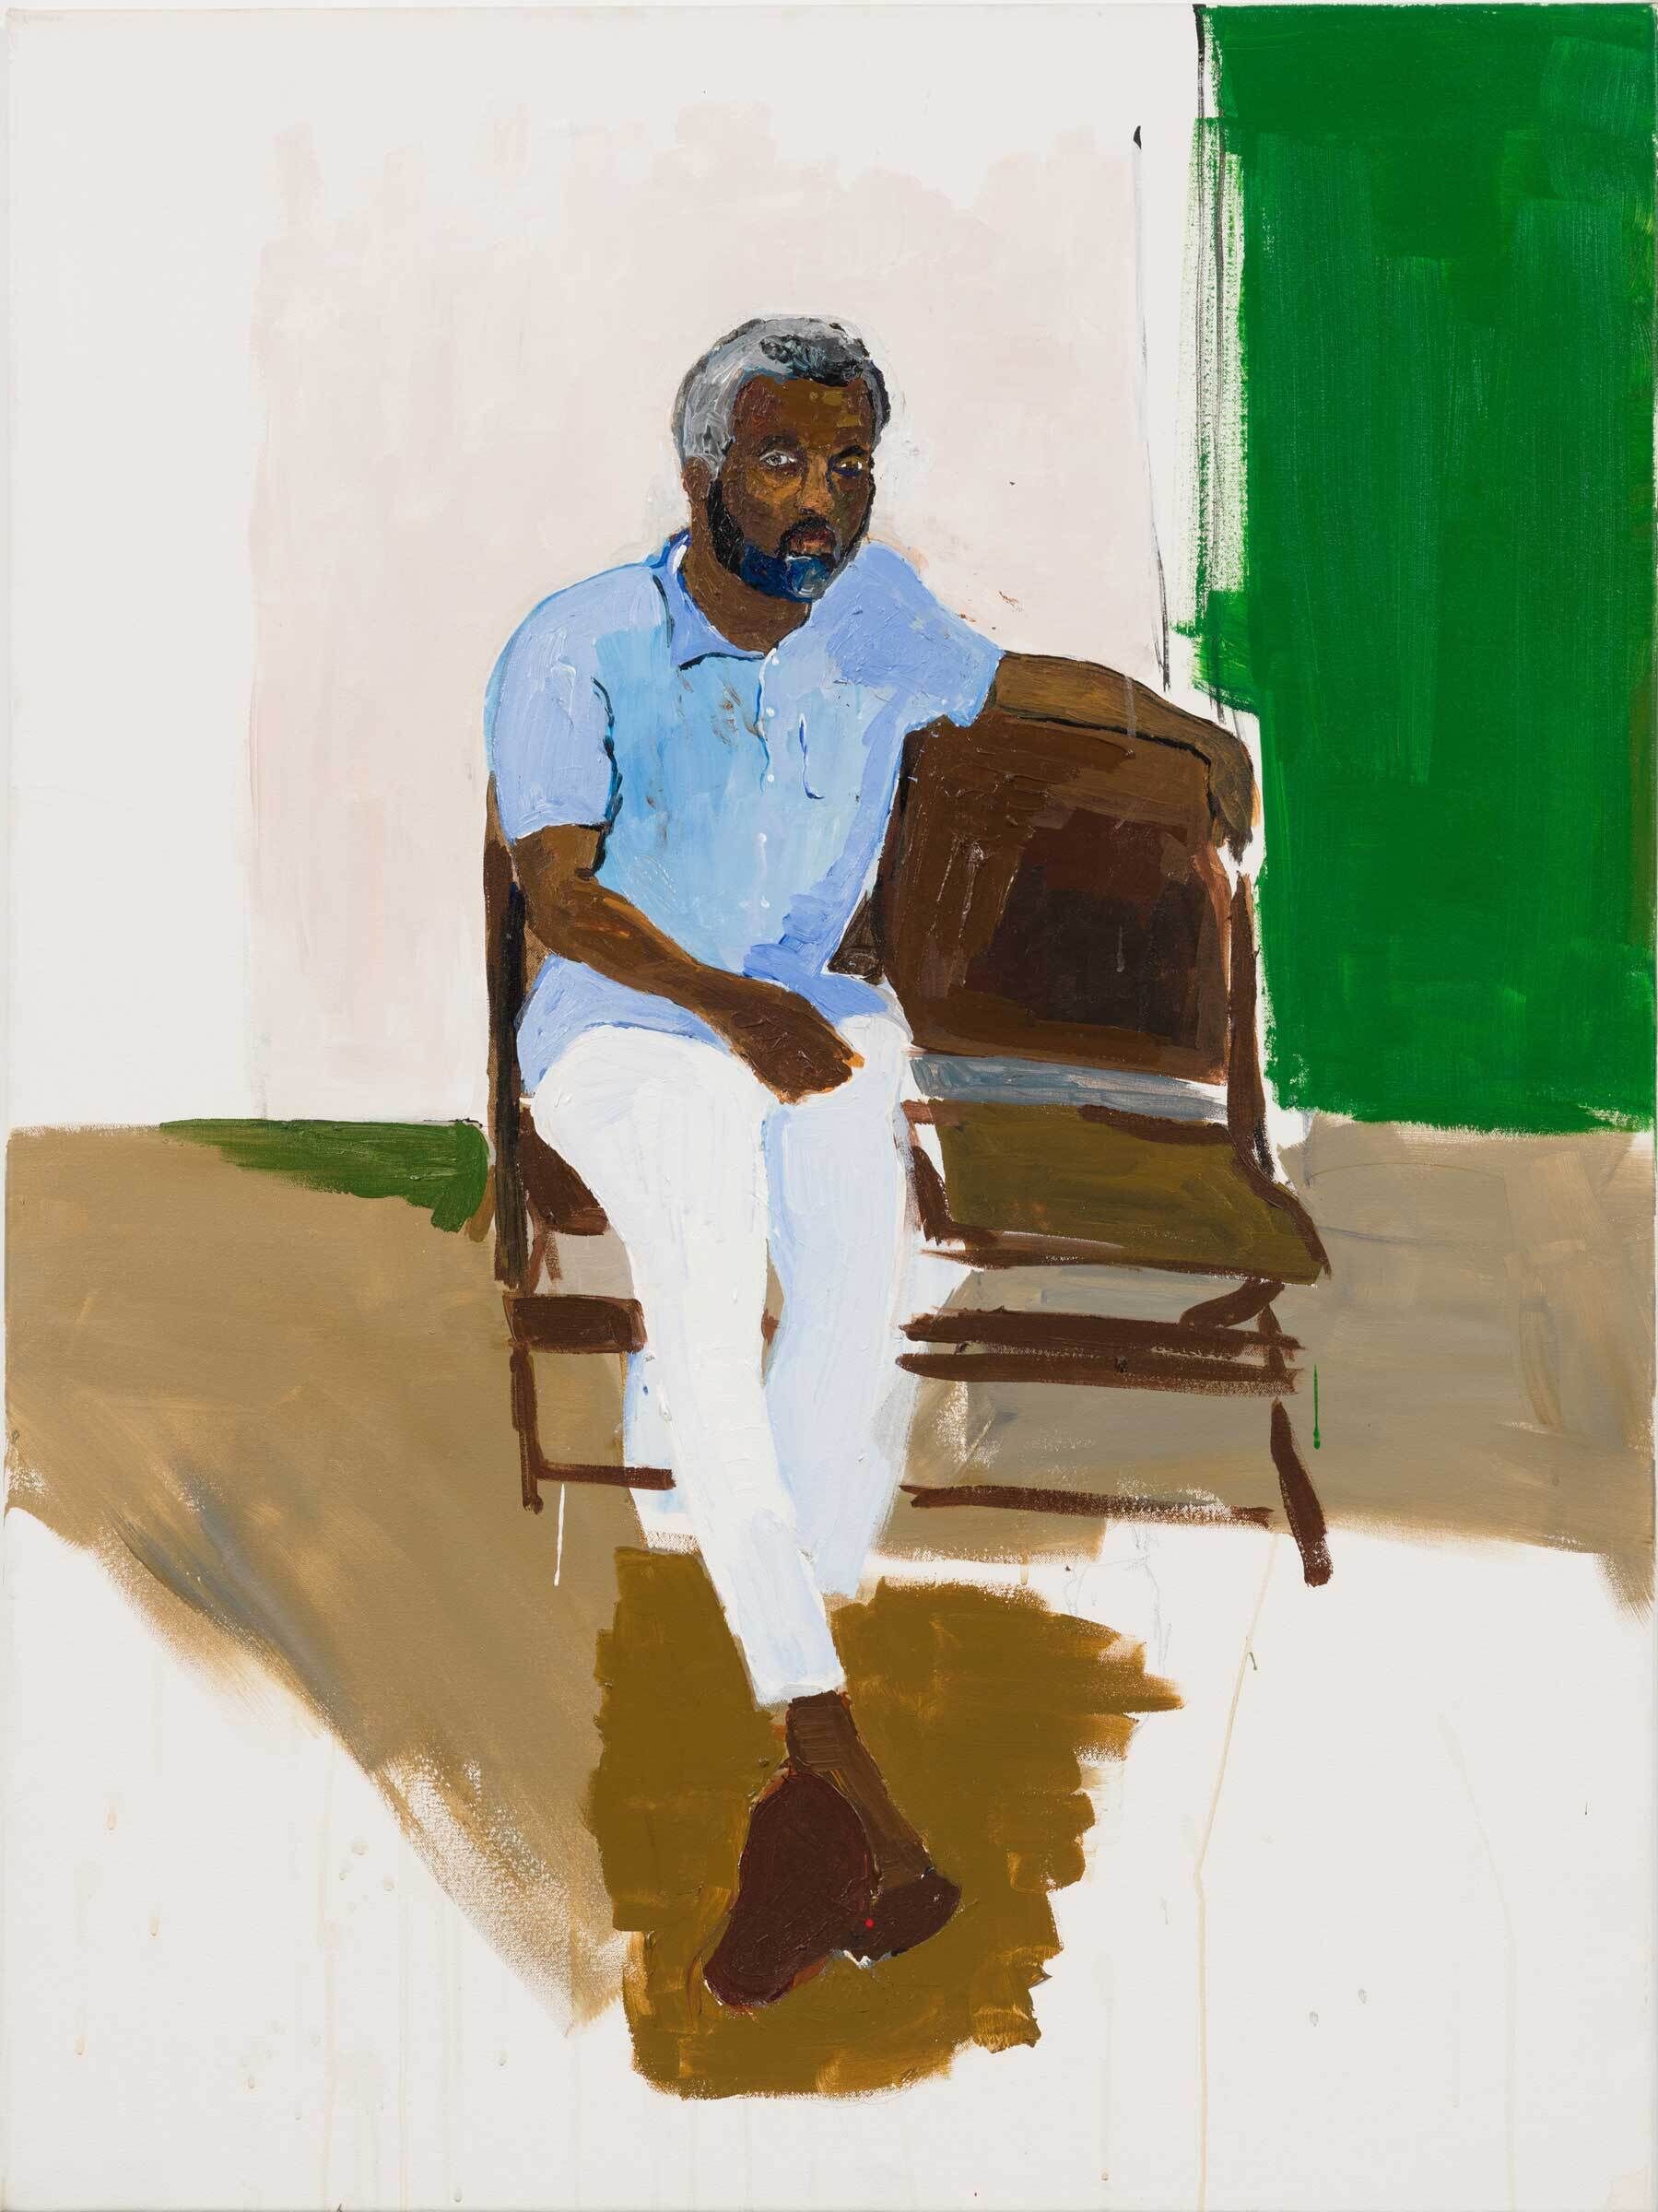 A Black man with grey hair and a black beard sits casually on a wooden folding chair. He wears a light blue button up t-shirt and white pants. The background is cream colored, and the shadow of the man and chair are a taupe color. The top right corner of the background is bright green.